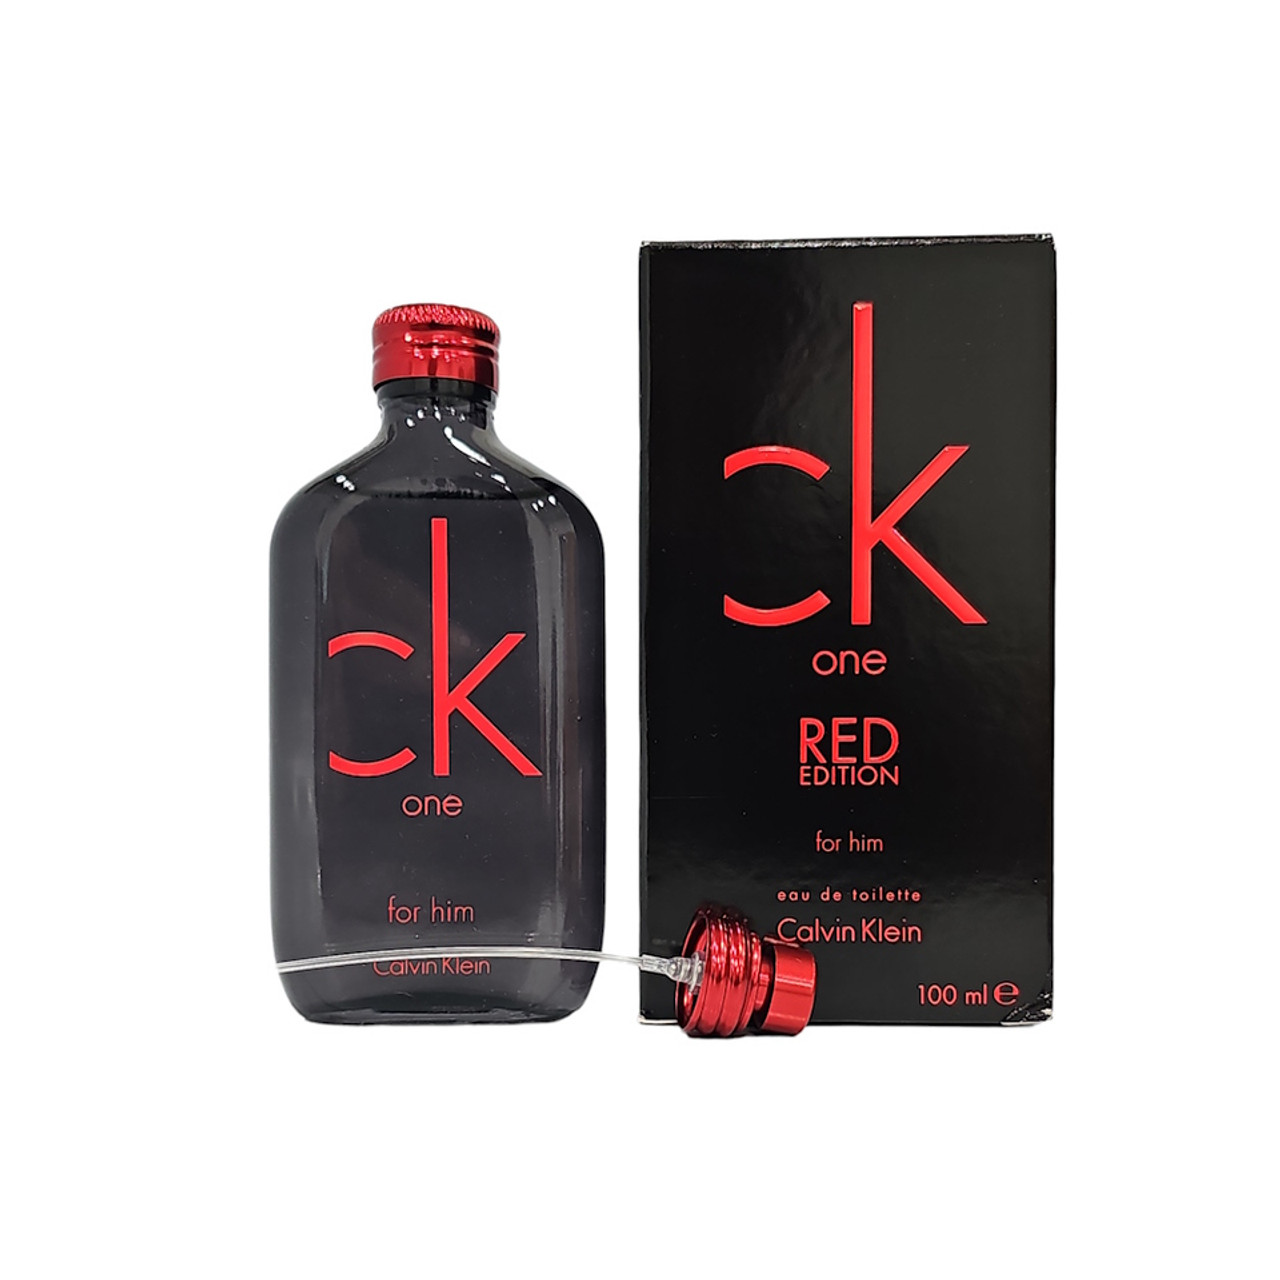 Ck-One-Red-Edition-by-Calvin-Klein-EDT-3.4-oz-/-100-ml-CKRD885